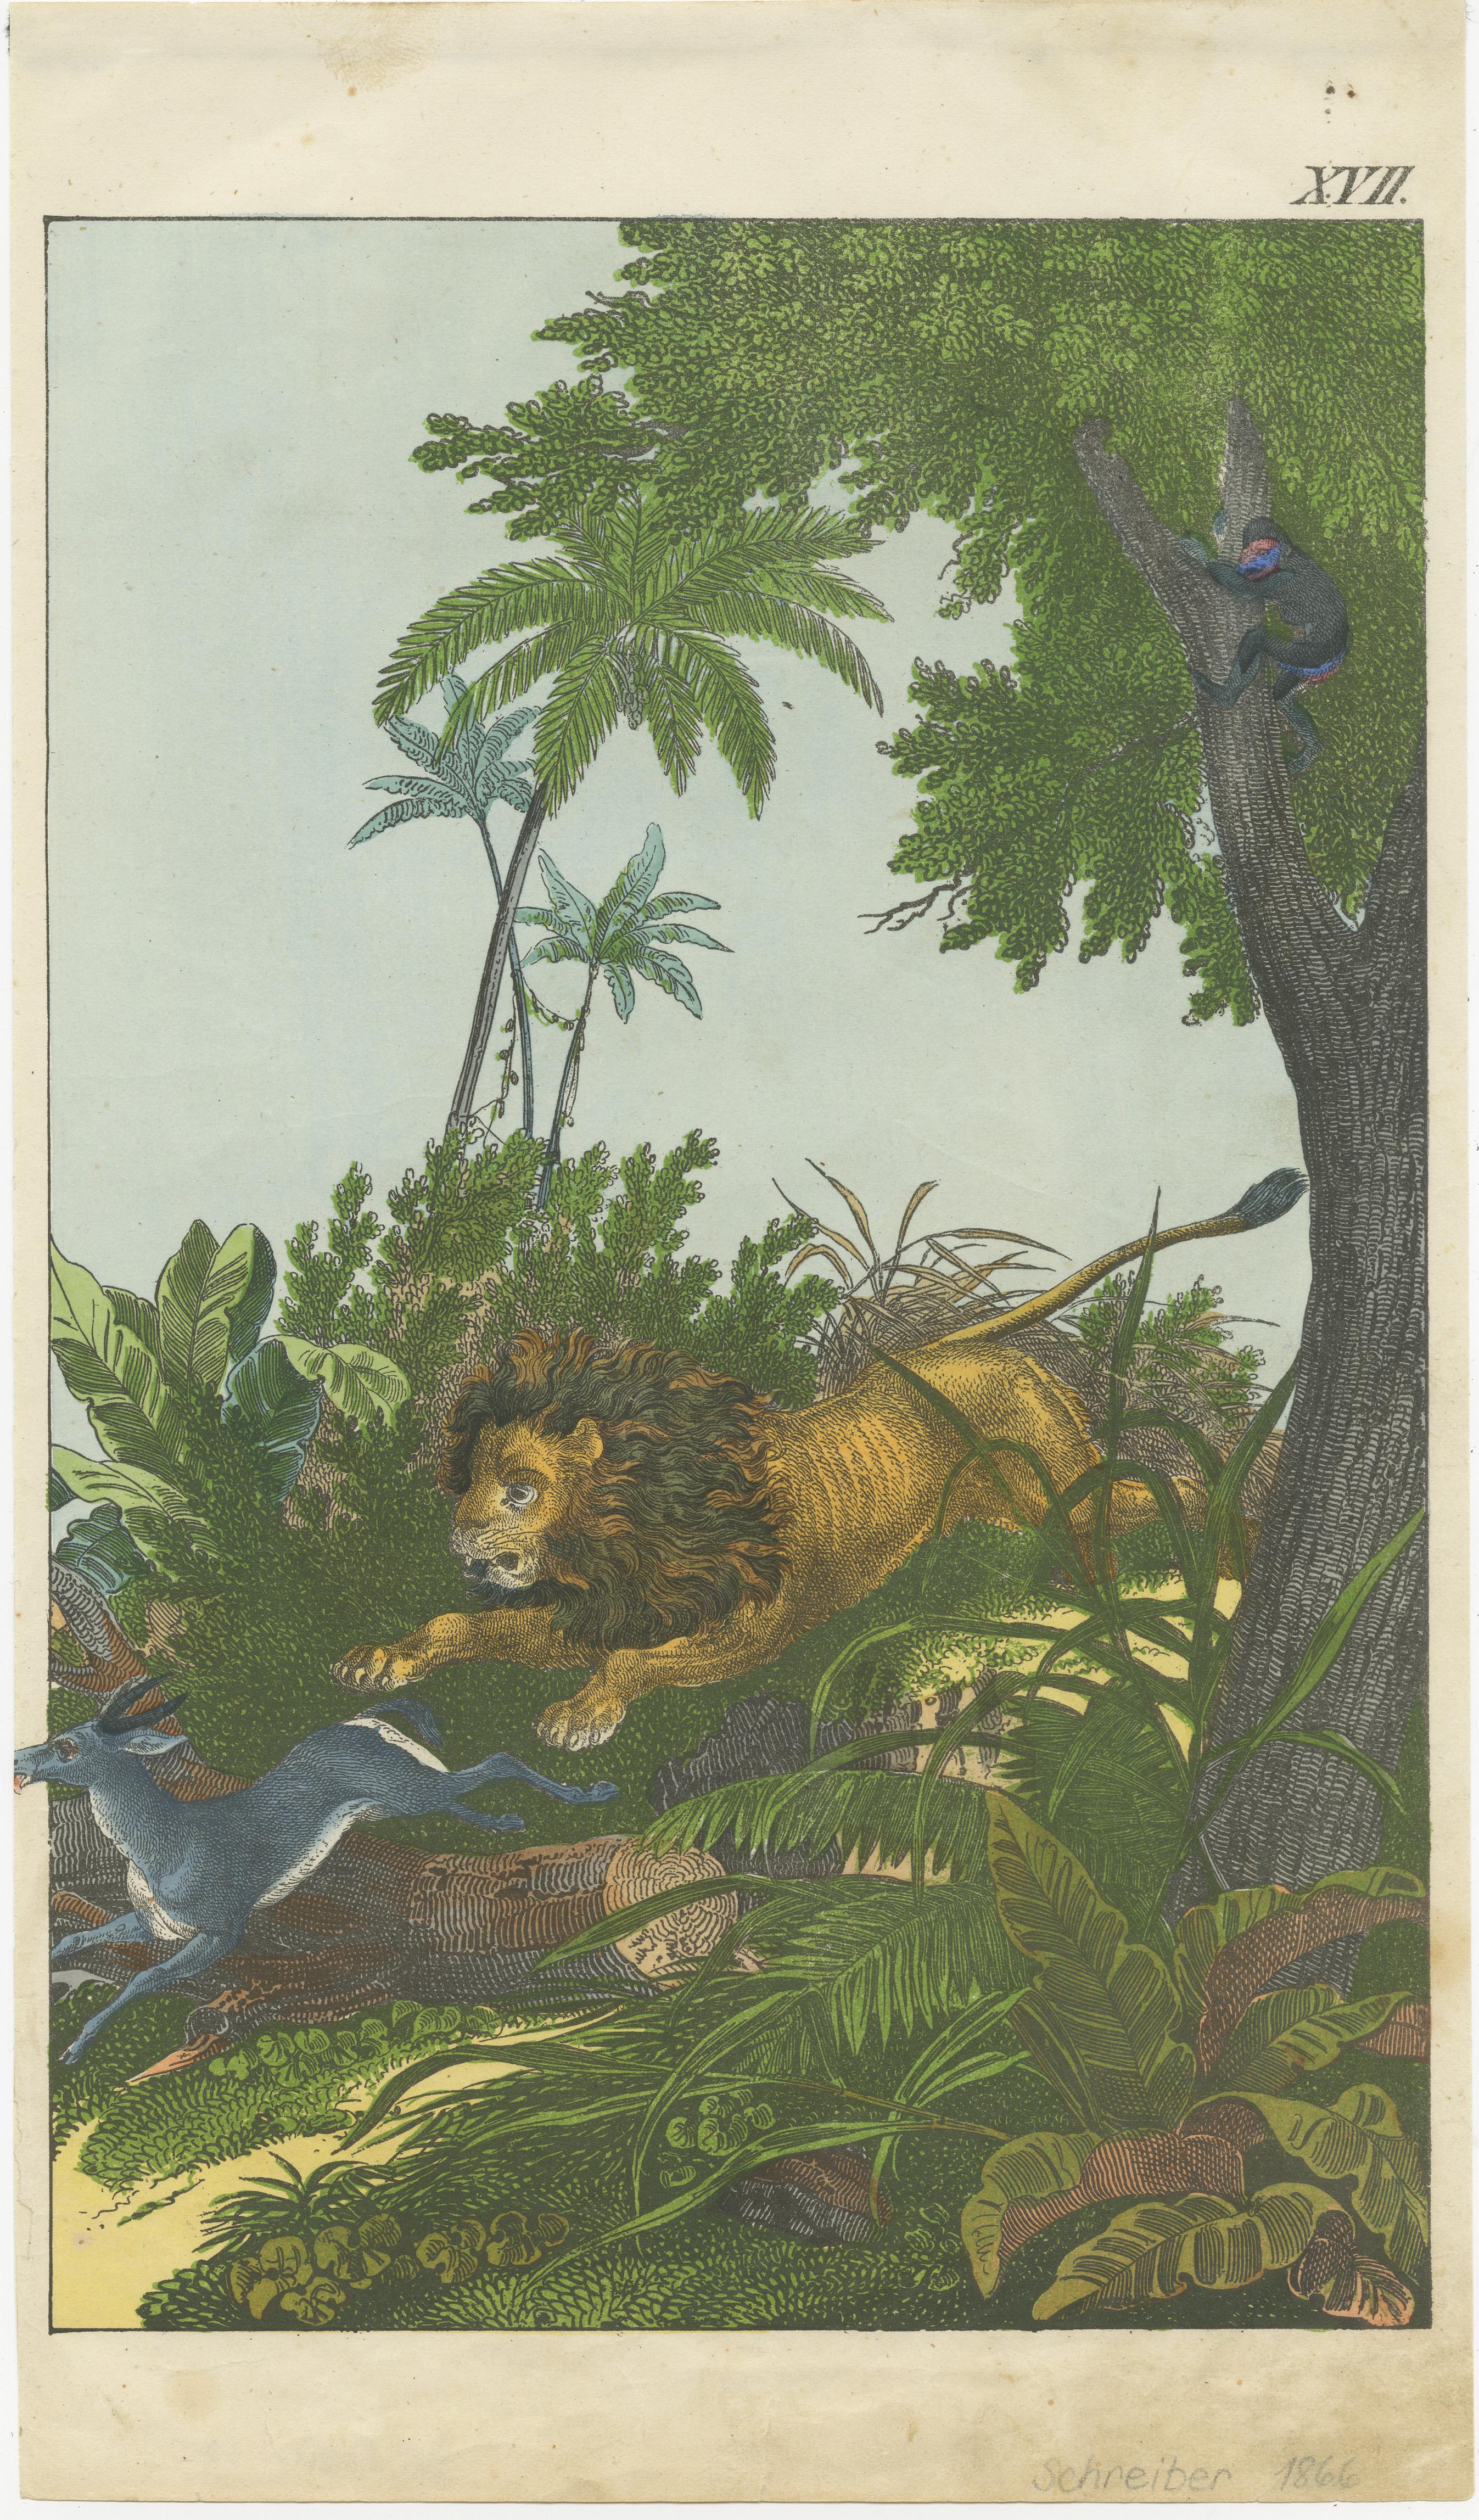 Lithograph of a hunting lion. Source unknown, to be determined. Published circa 1870.